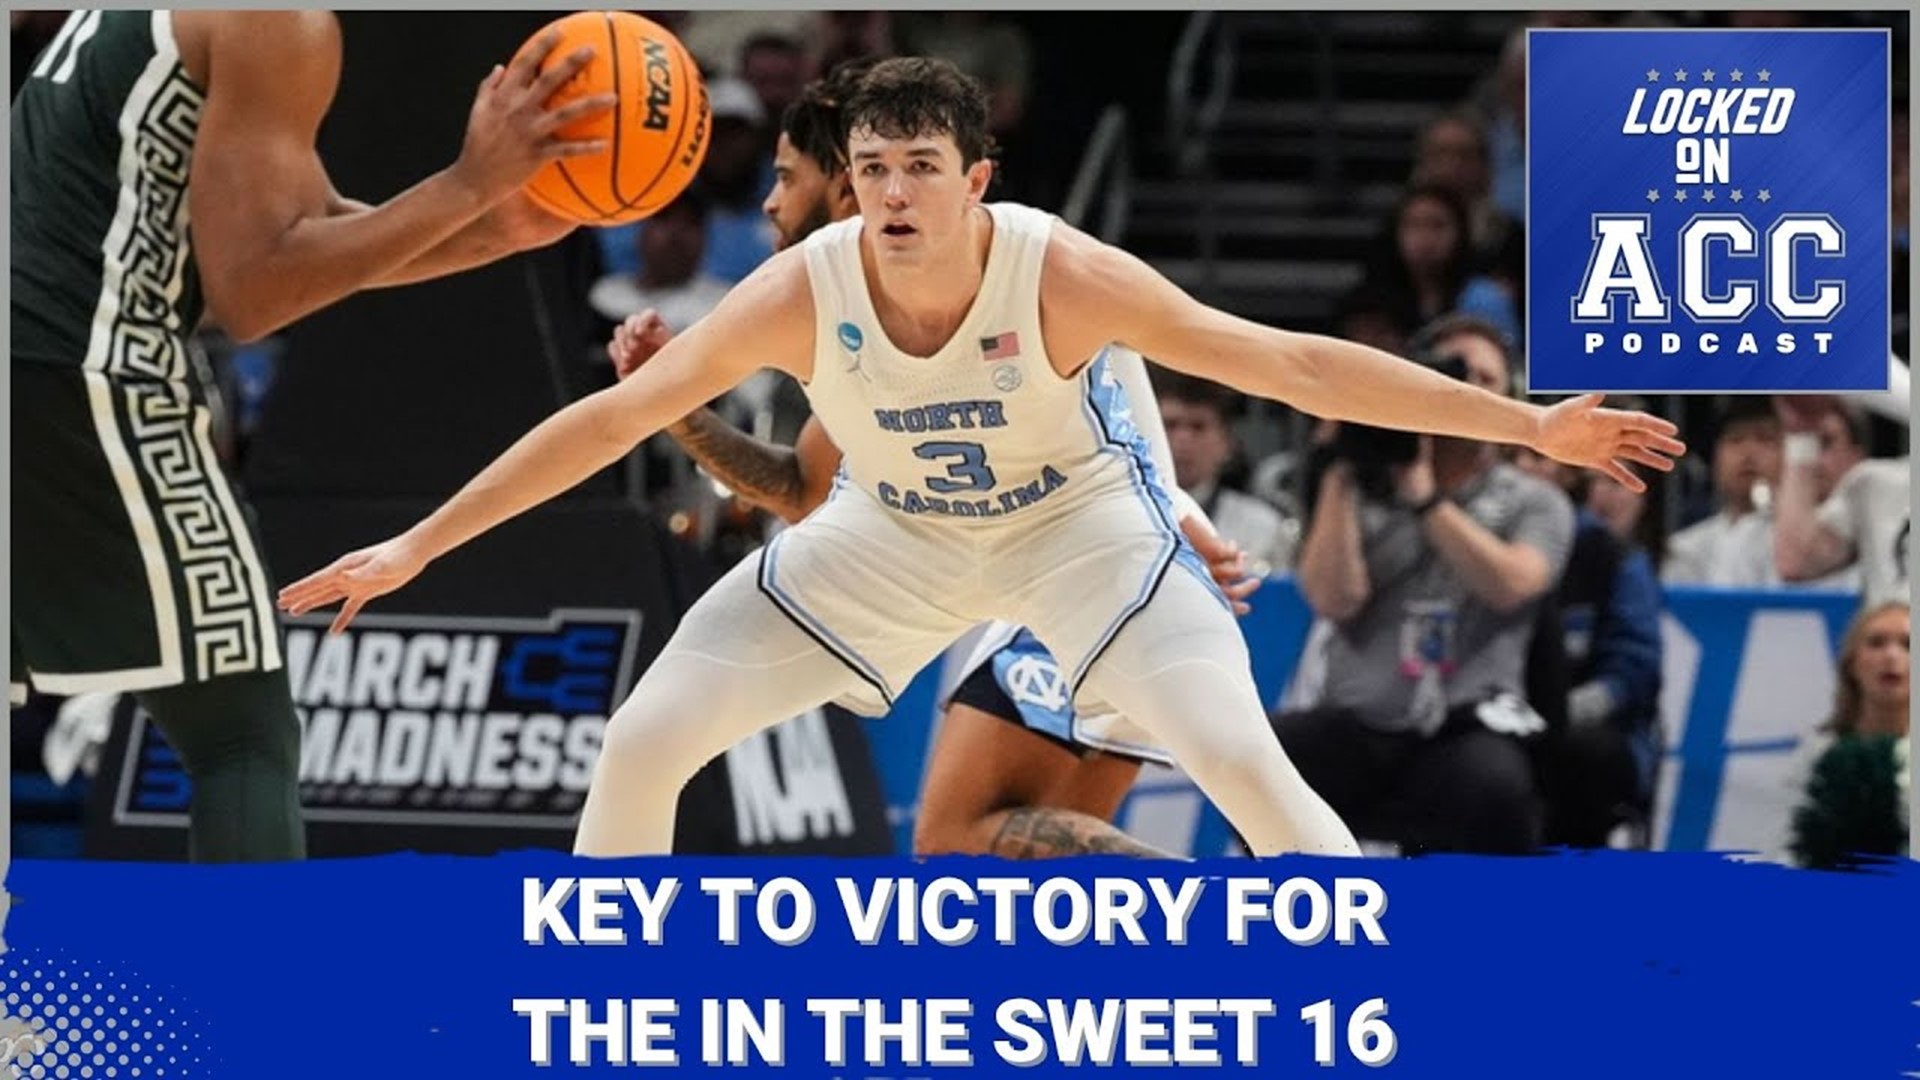 In this episode, Candace and Kenton give the keys for each of the 4 men's teams in the sweet 16 and there's a surprise announcement